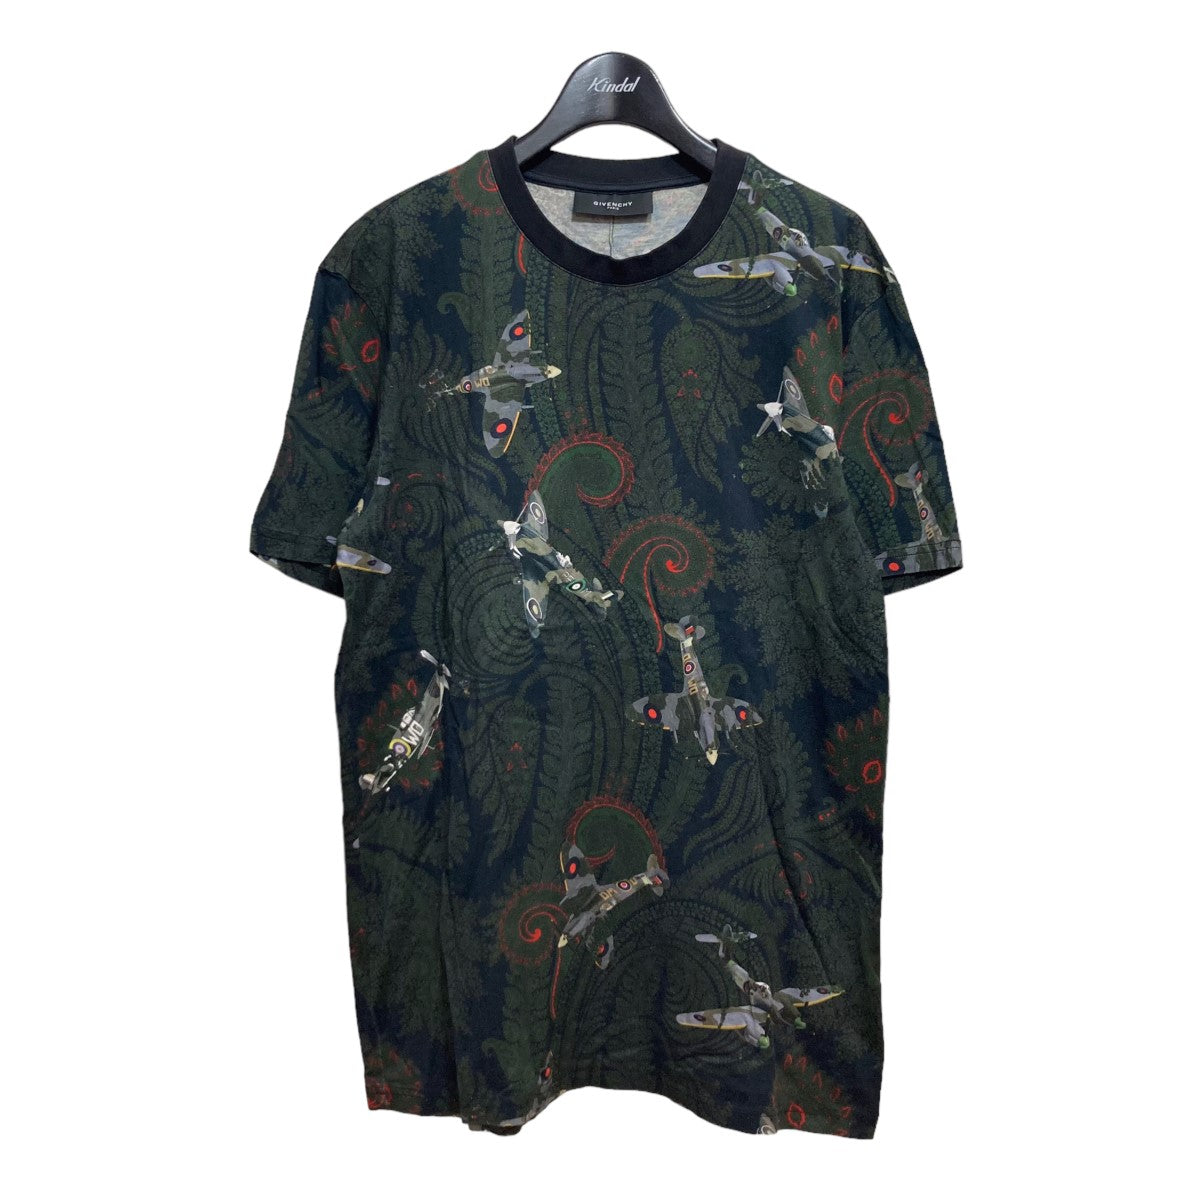 Givenchy 総柄 Tシャツ身幅59cm